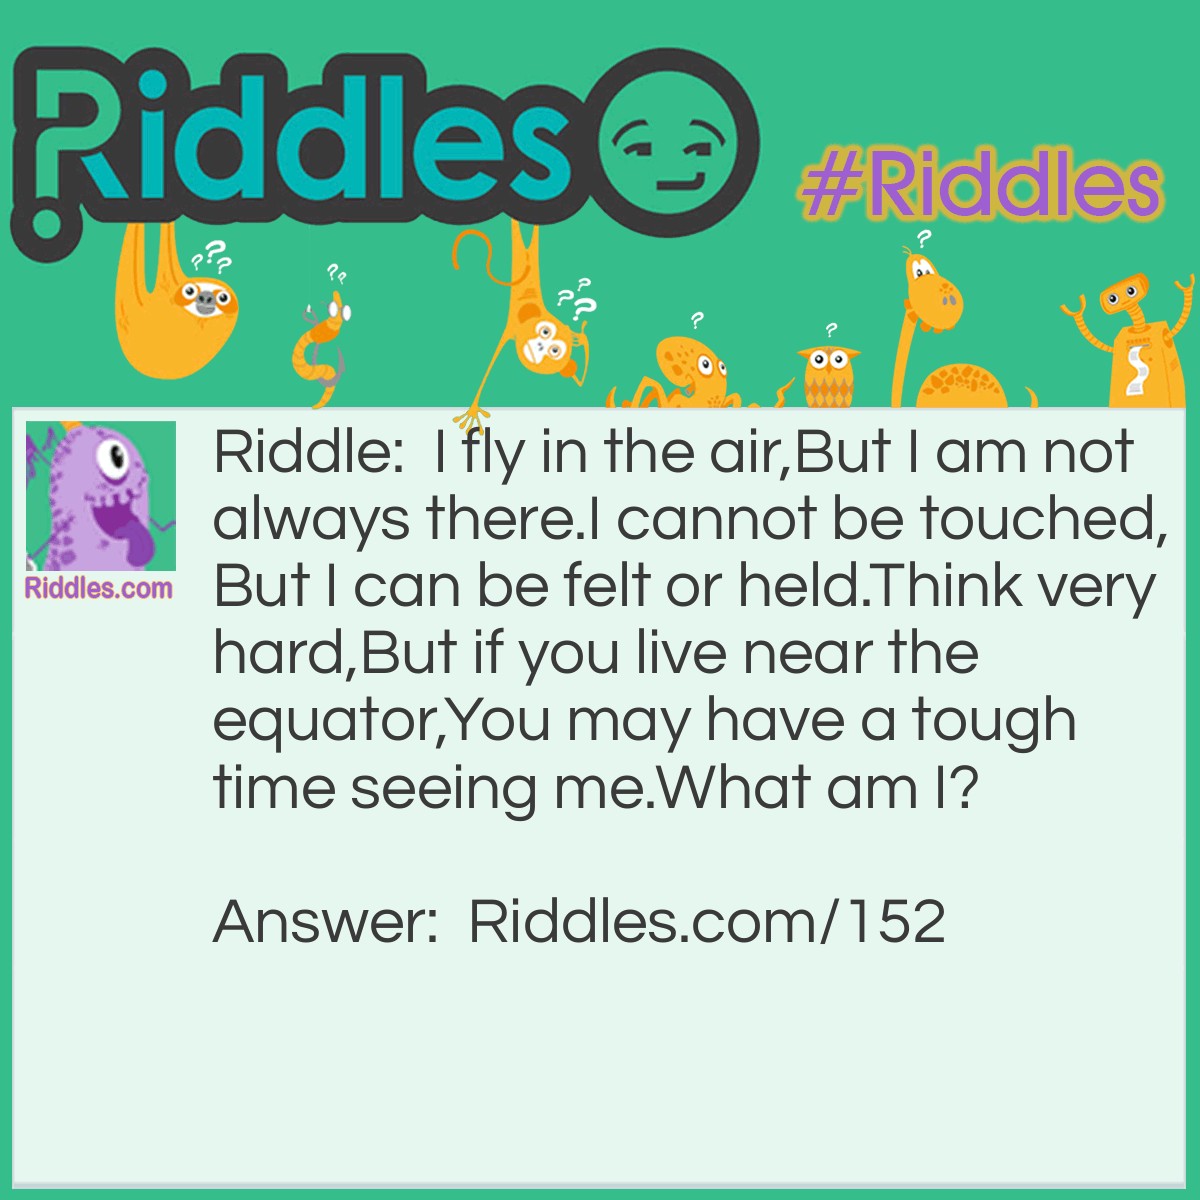 Riddle: I fly in the air, But I am not always there. I cannot be touched, But I can be felt or held. Think very hard, But if you live near the equator, You may have a tough time seeing me. What am I? Answer: Your breath.